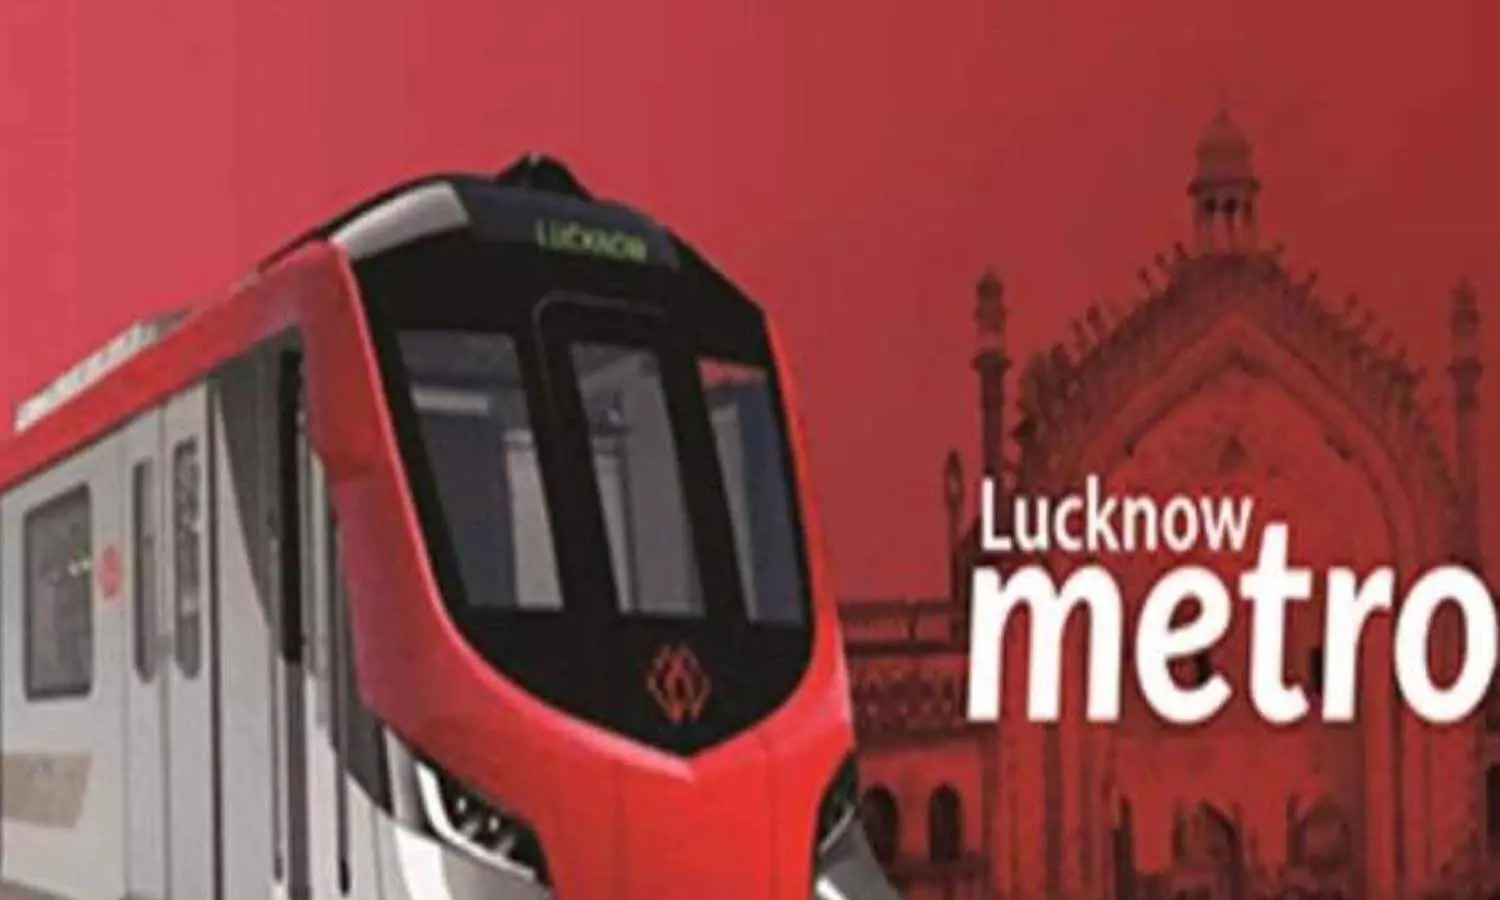 Seven New Metro Routes Proposed by LDA, Clear the Way for Expansion